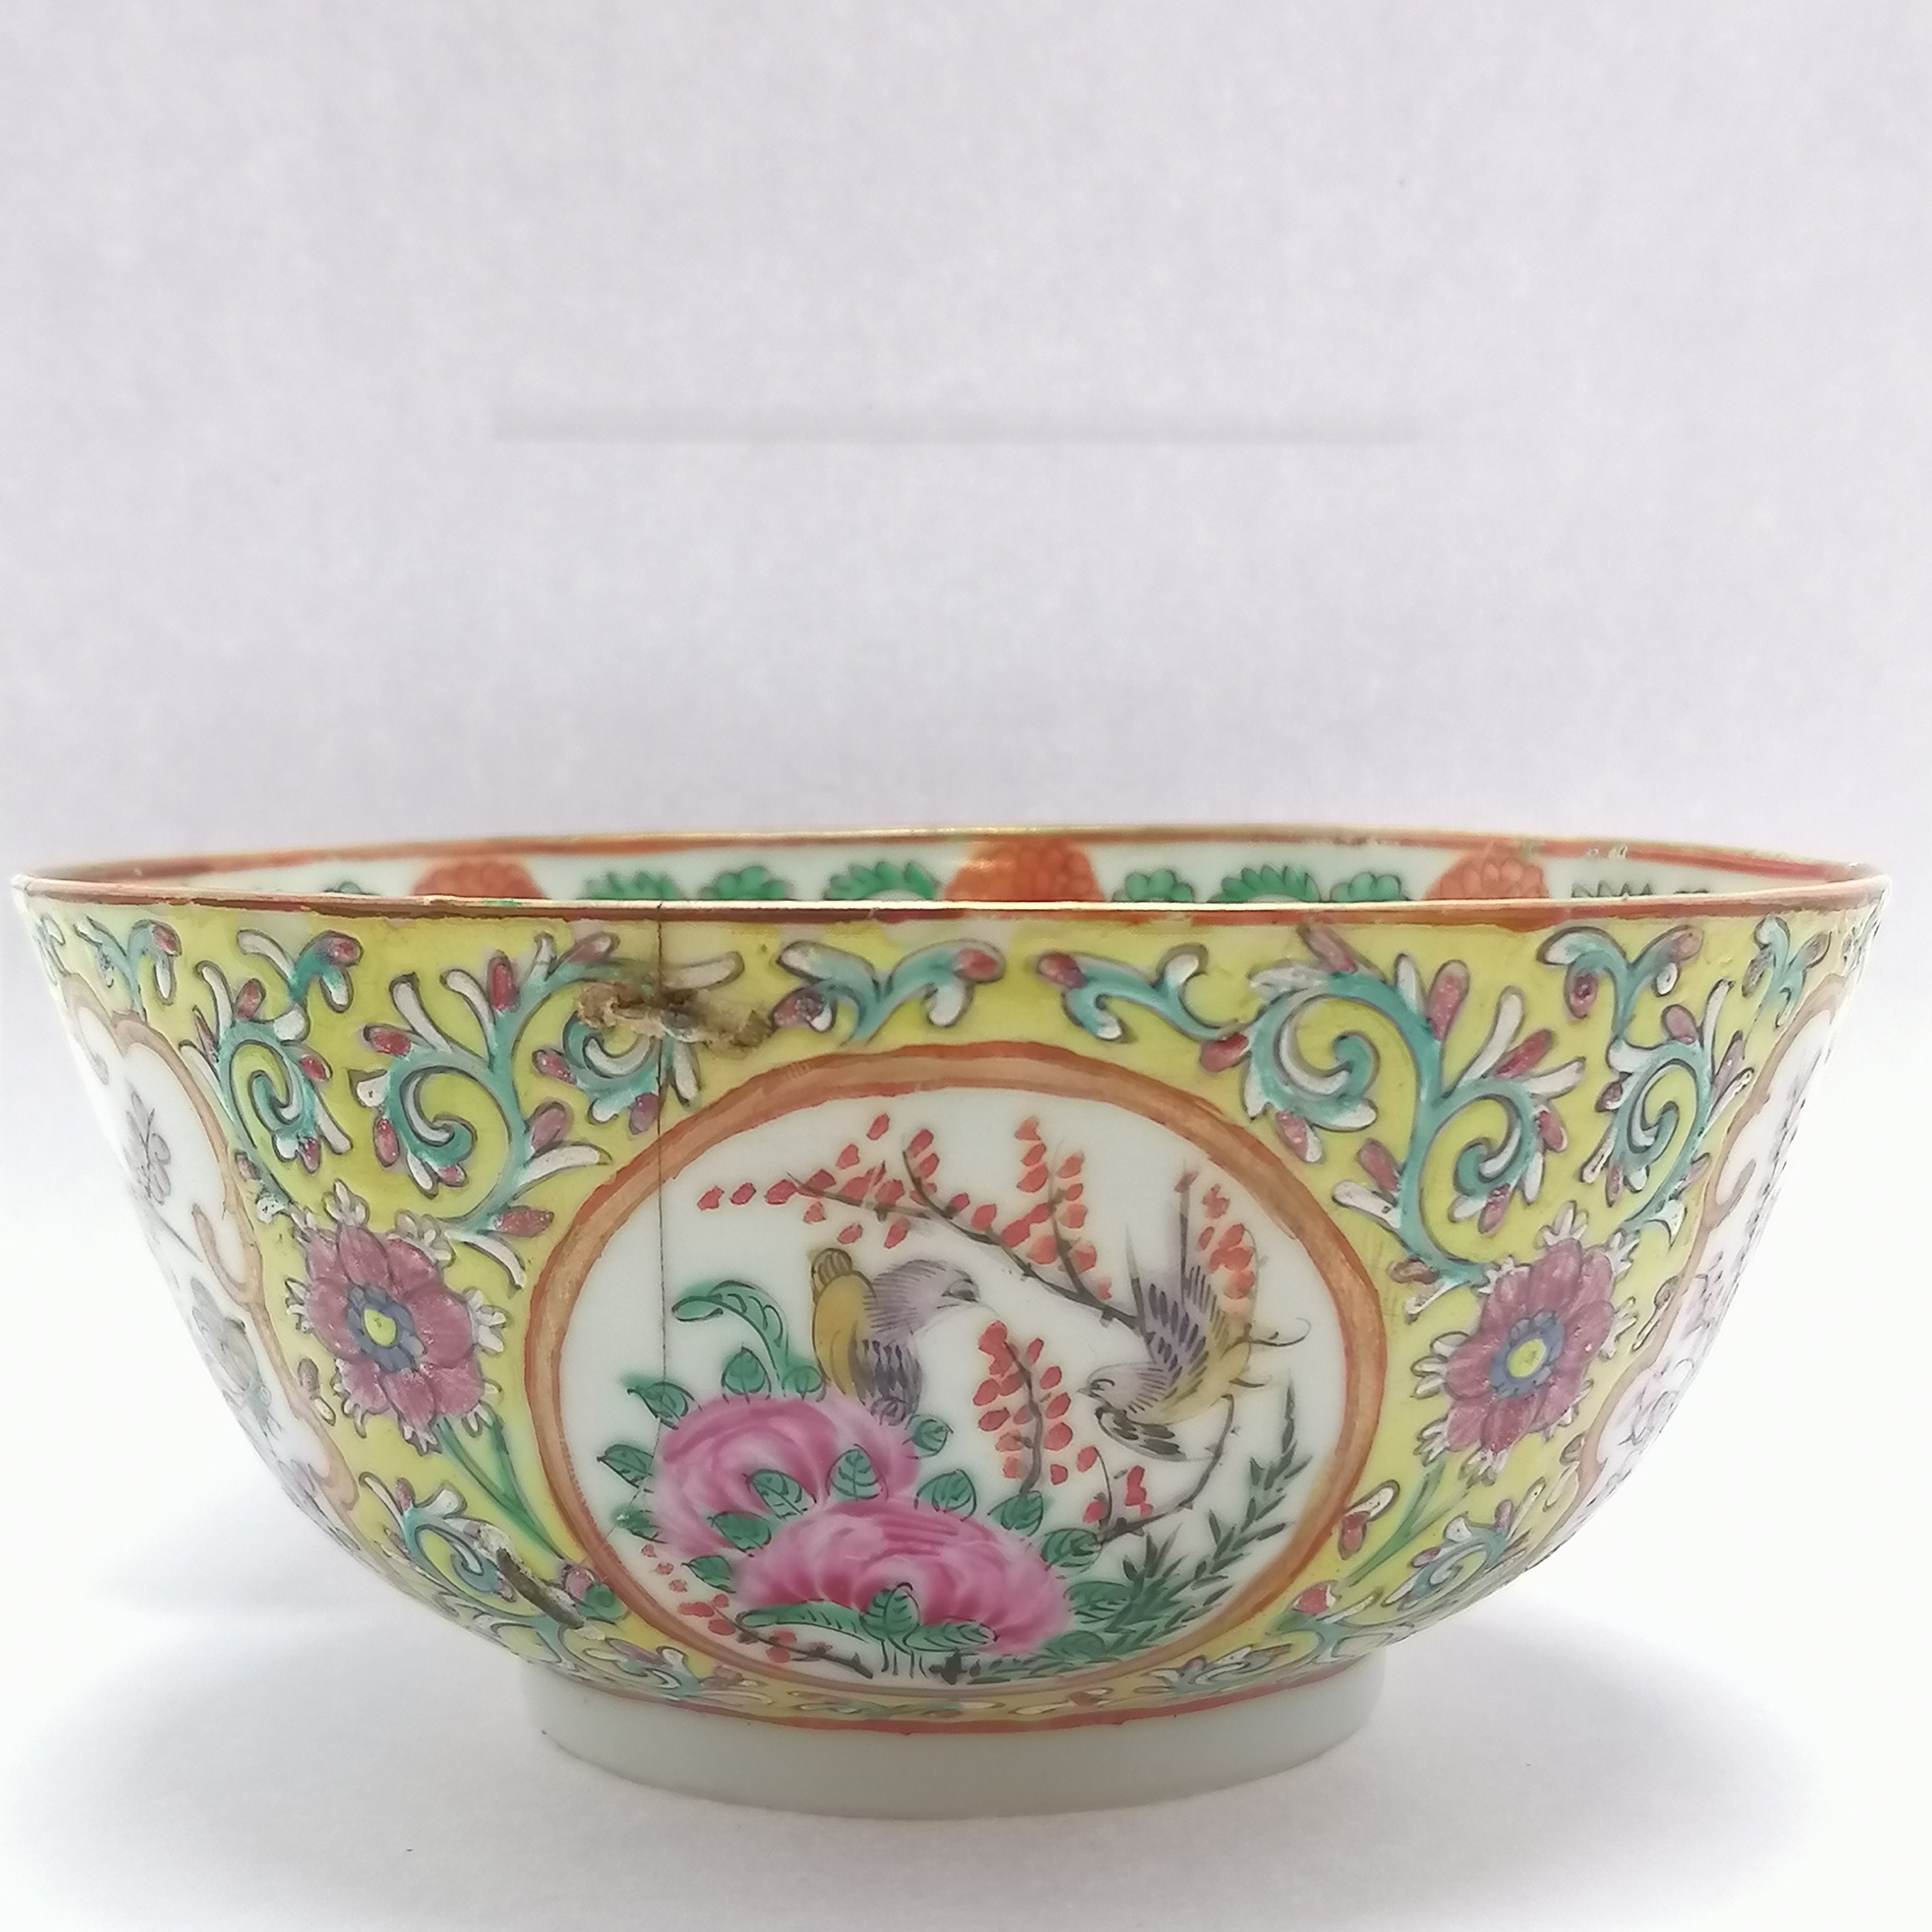 Antique Chinese famille rose bowl - yellow grounded with profuse floral & butterfly & bird (inc - Image 6 of 10